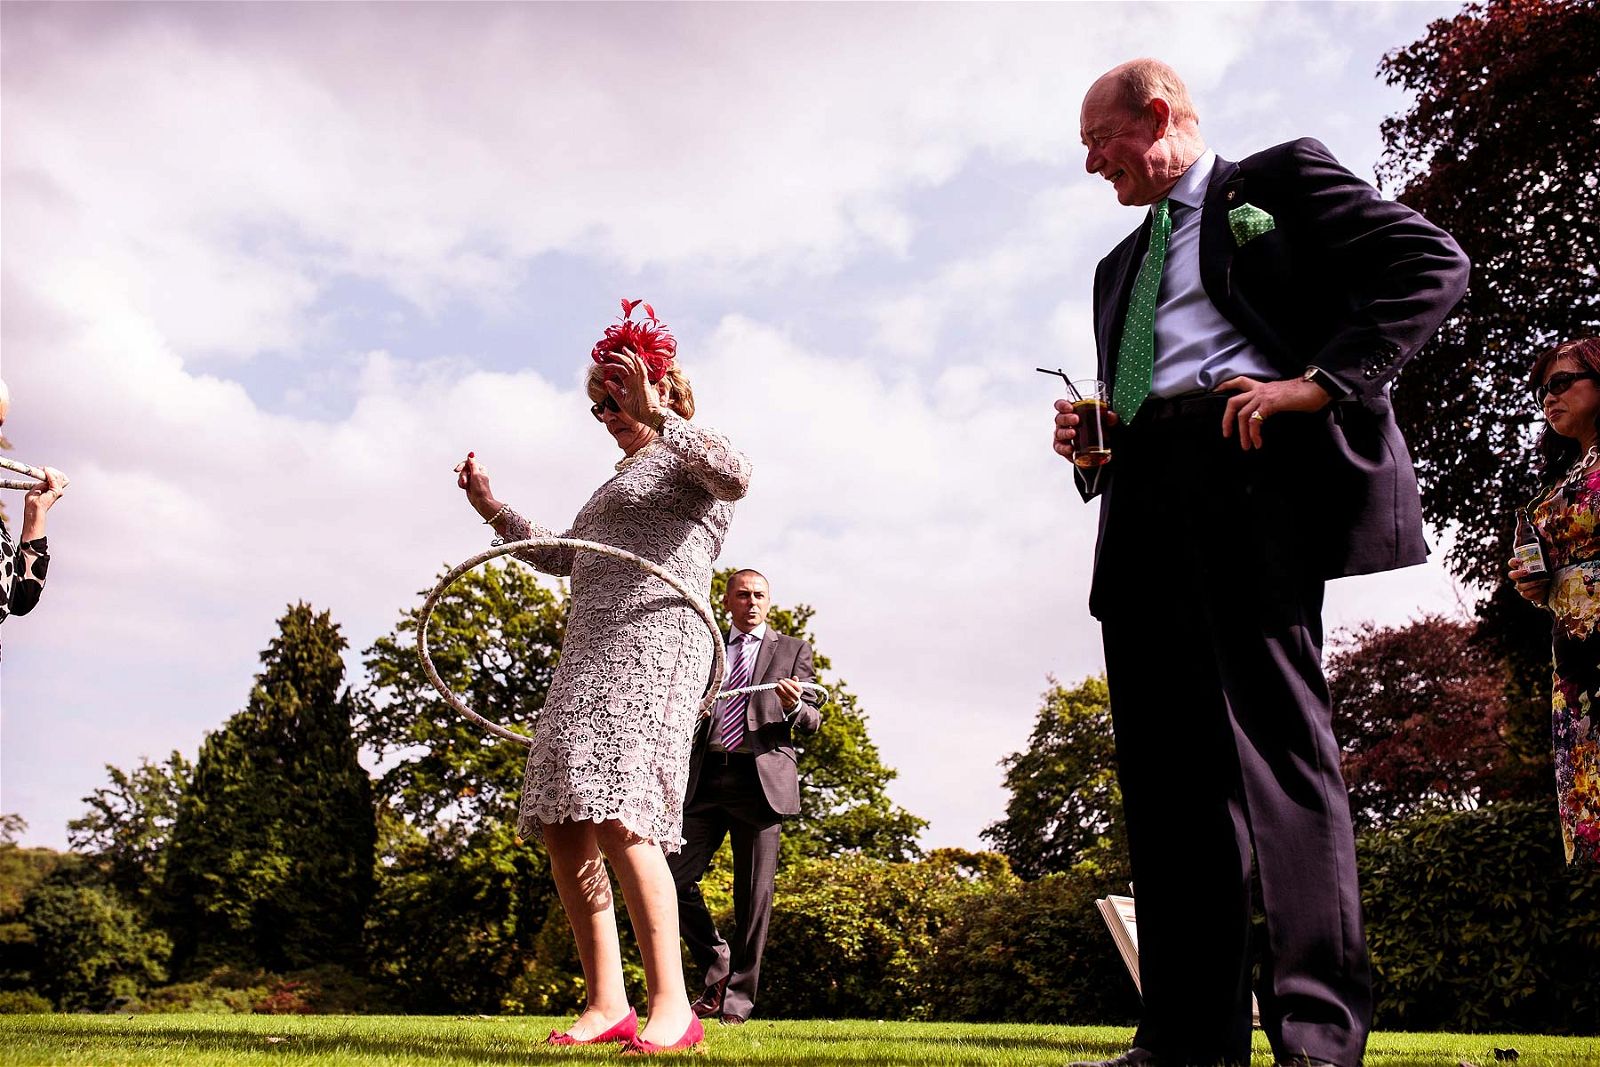 Fun with the garden games on the lawns at Sandon Hall in Stafford by Stafford Reportage Wedding Photographer Stuart James